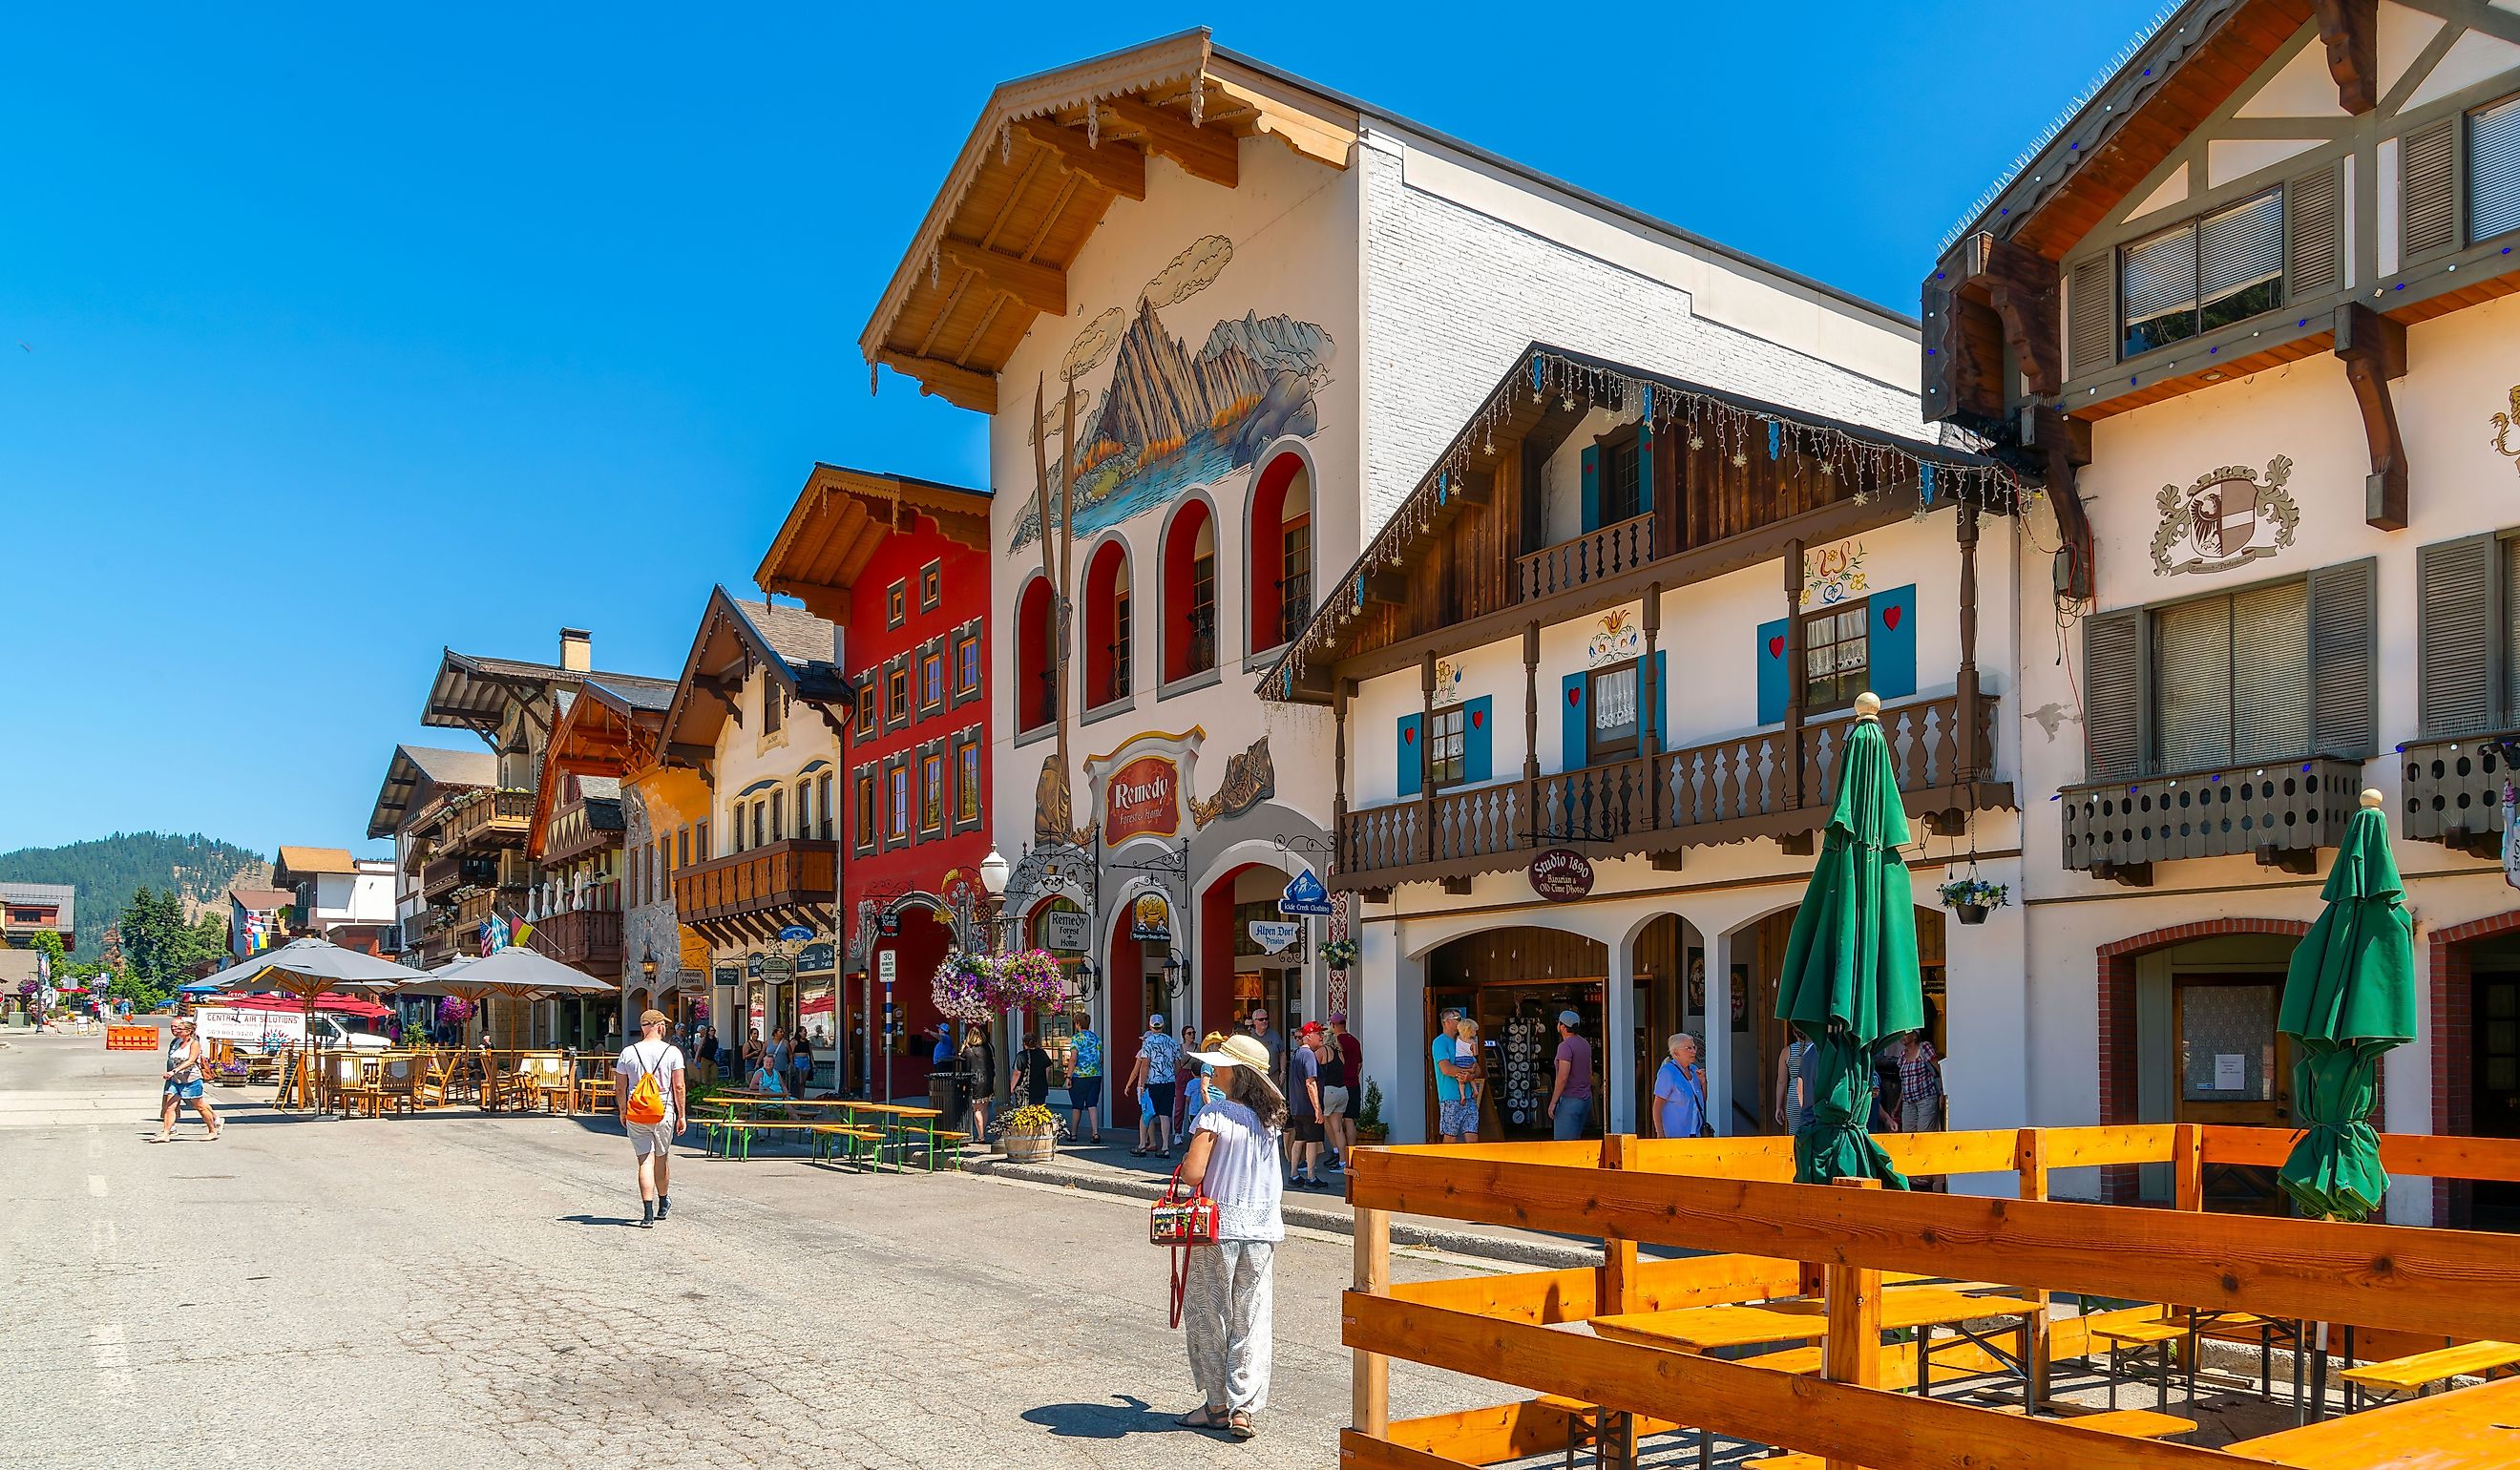  Shops and sidewalk cafes line the quaint Bavarian themed main street of the tourist resort town of Leavenworth, in the mountains of Central Washington State. Editorial credit: Kirk Fisher / Shutterstock.com